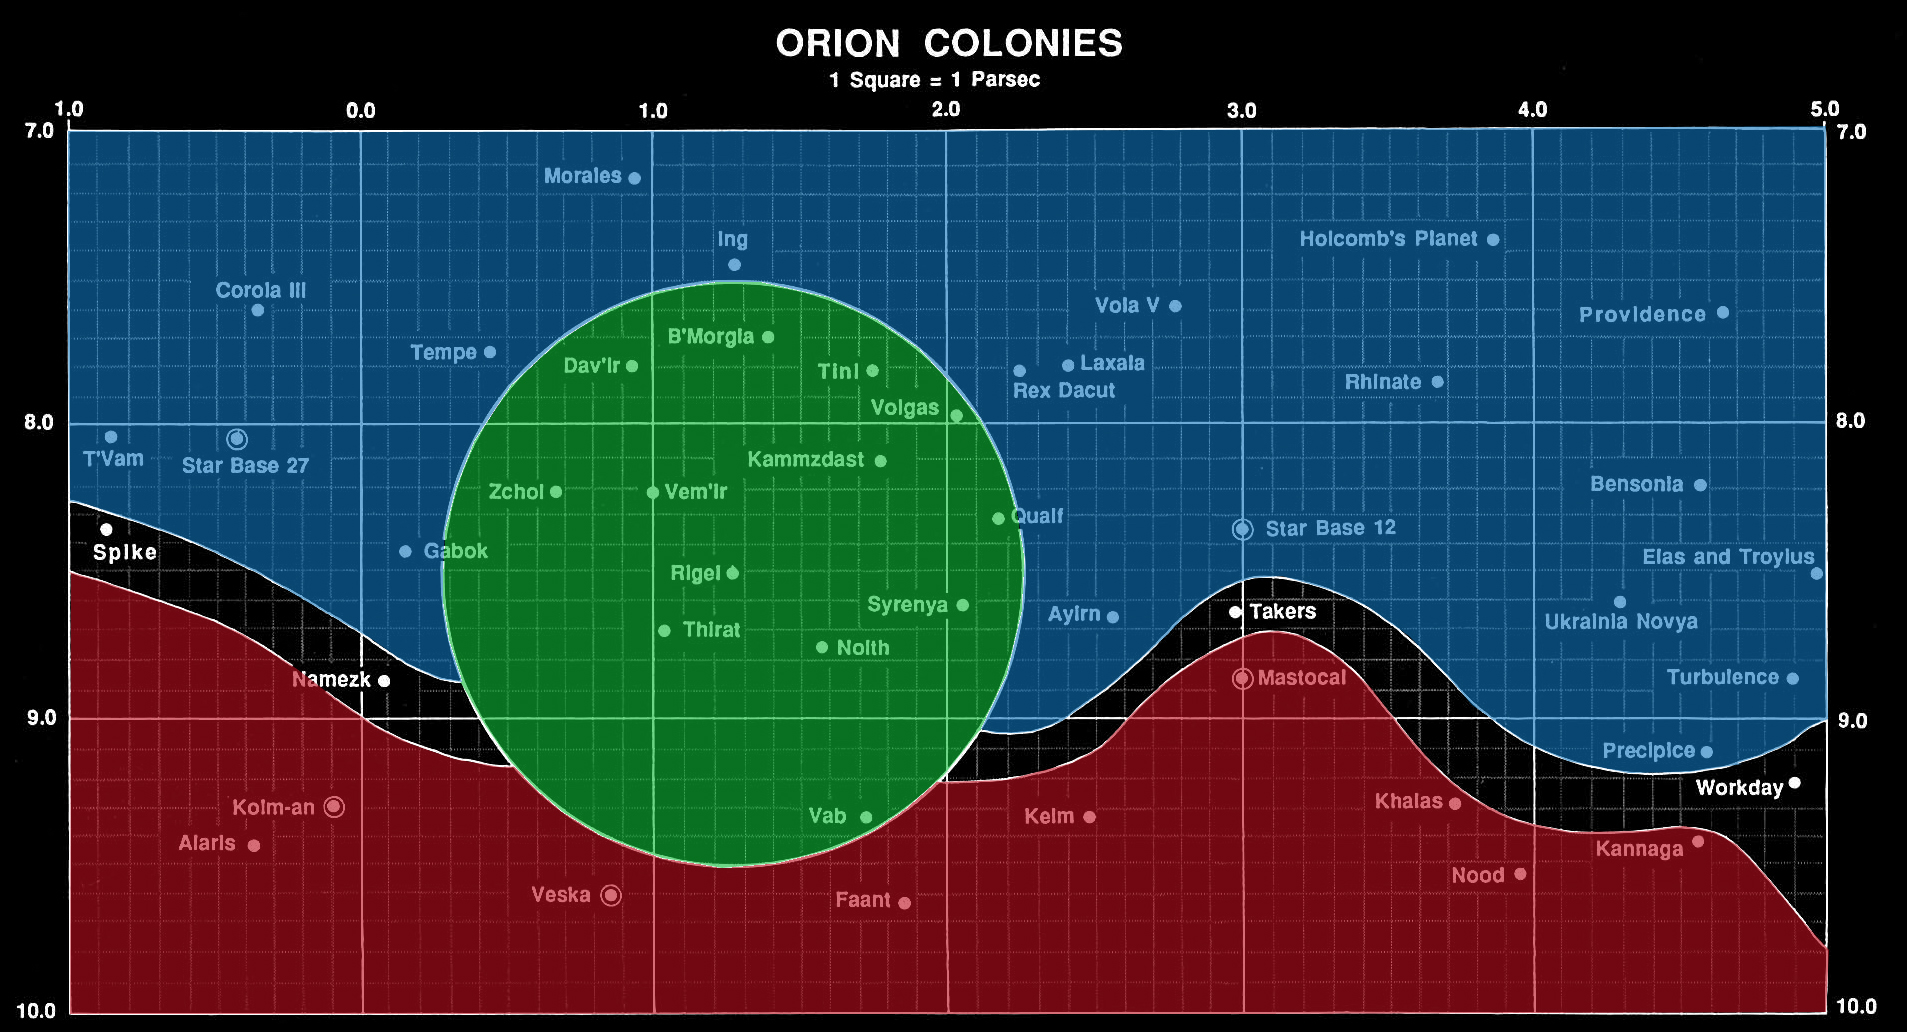 Map of the Orion Colonies (FASA 2008A; Original B&W Image)